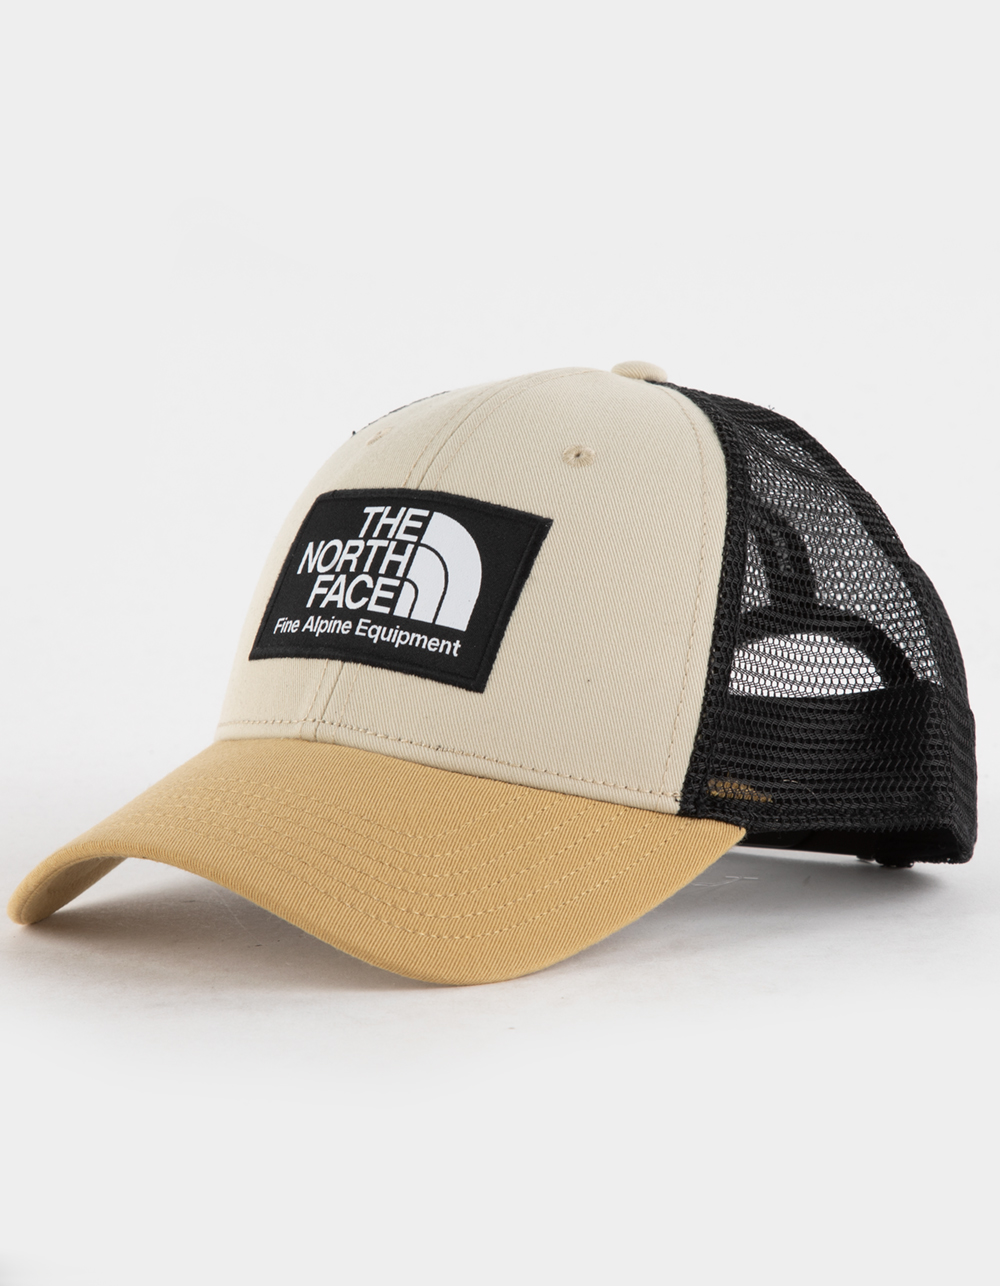 THE NORTH FACE Mudder Mens Trucker Hat - WHITE COMBO | Tillys